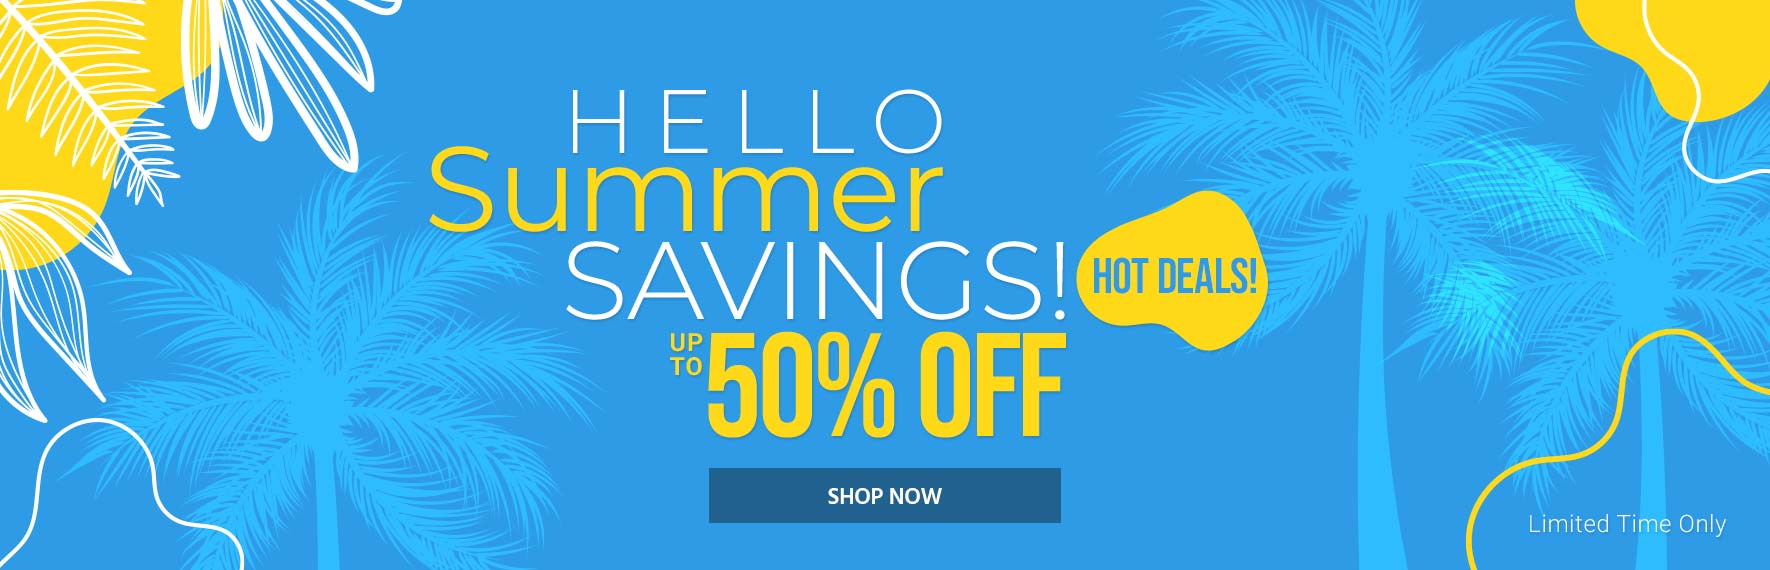 "Hello Summer Savings! Up to 50% off Hot Deals! Limited Time Only Shop Now"